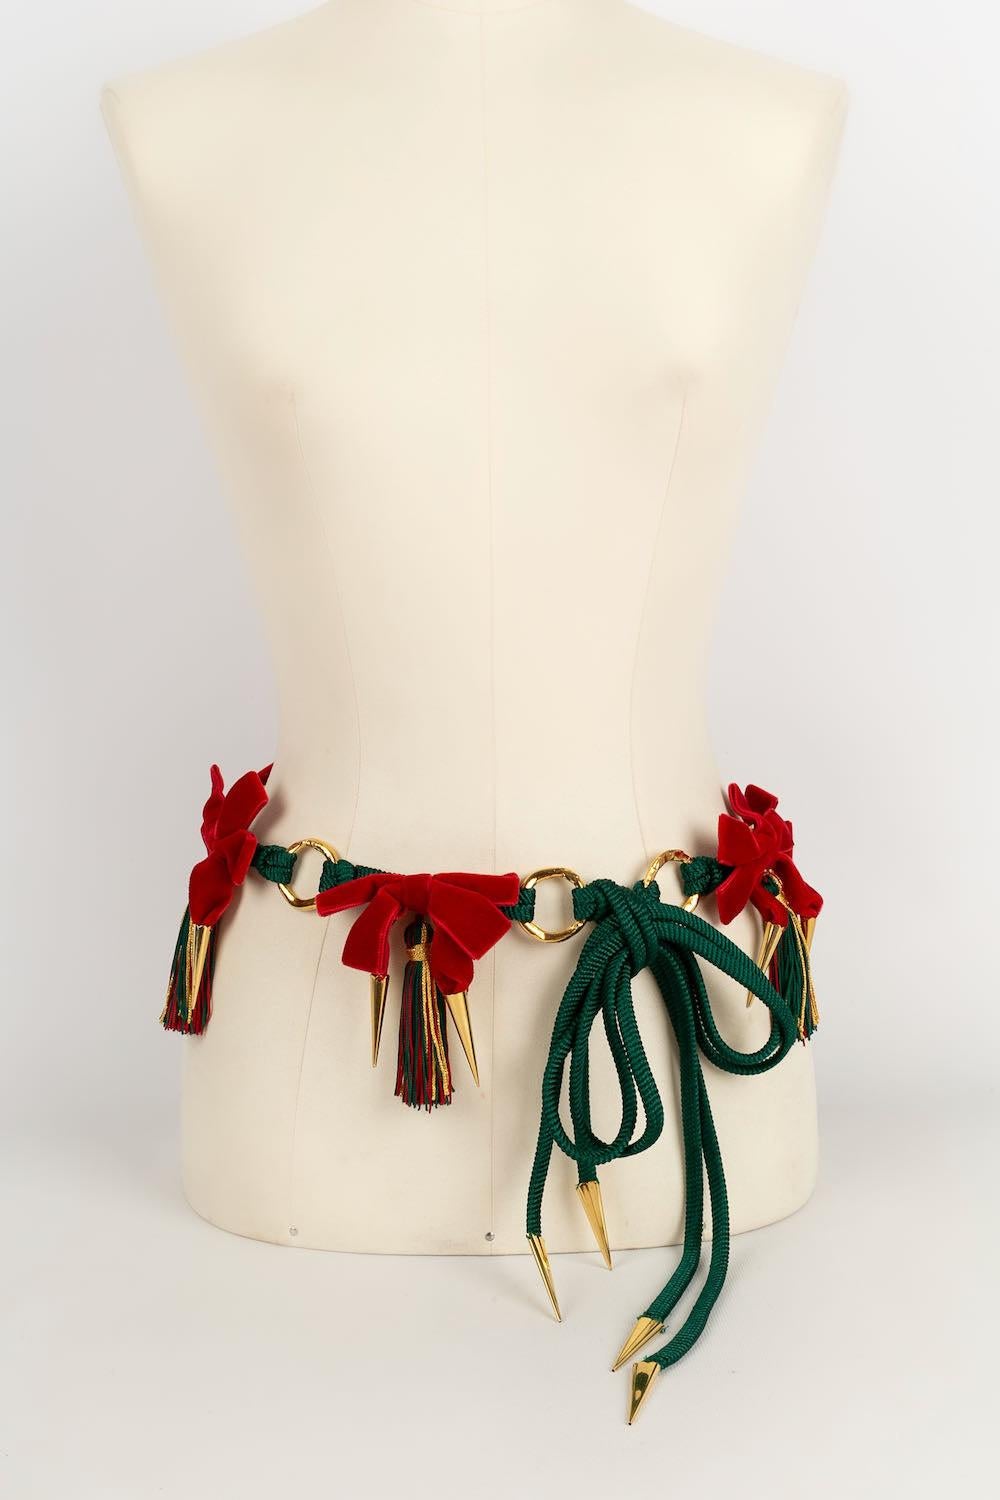 Yves Saint Laurent - Belt in passementerie.

Additional information: 
Dimensions: Length: about 88 cm
Condition: Very good condition
Seller Ref number: ACC75